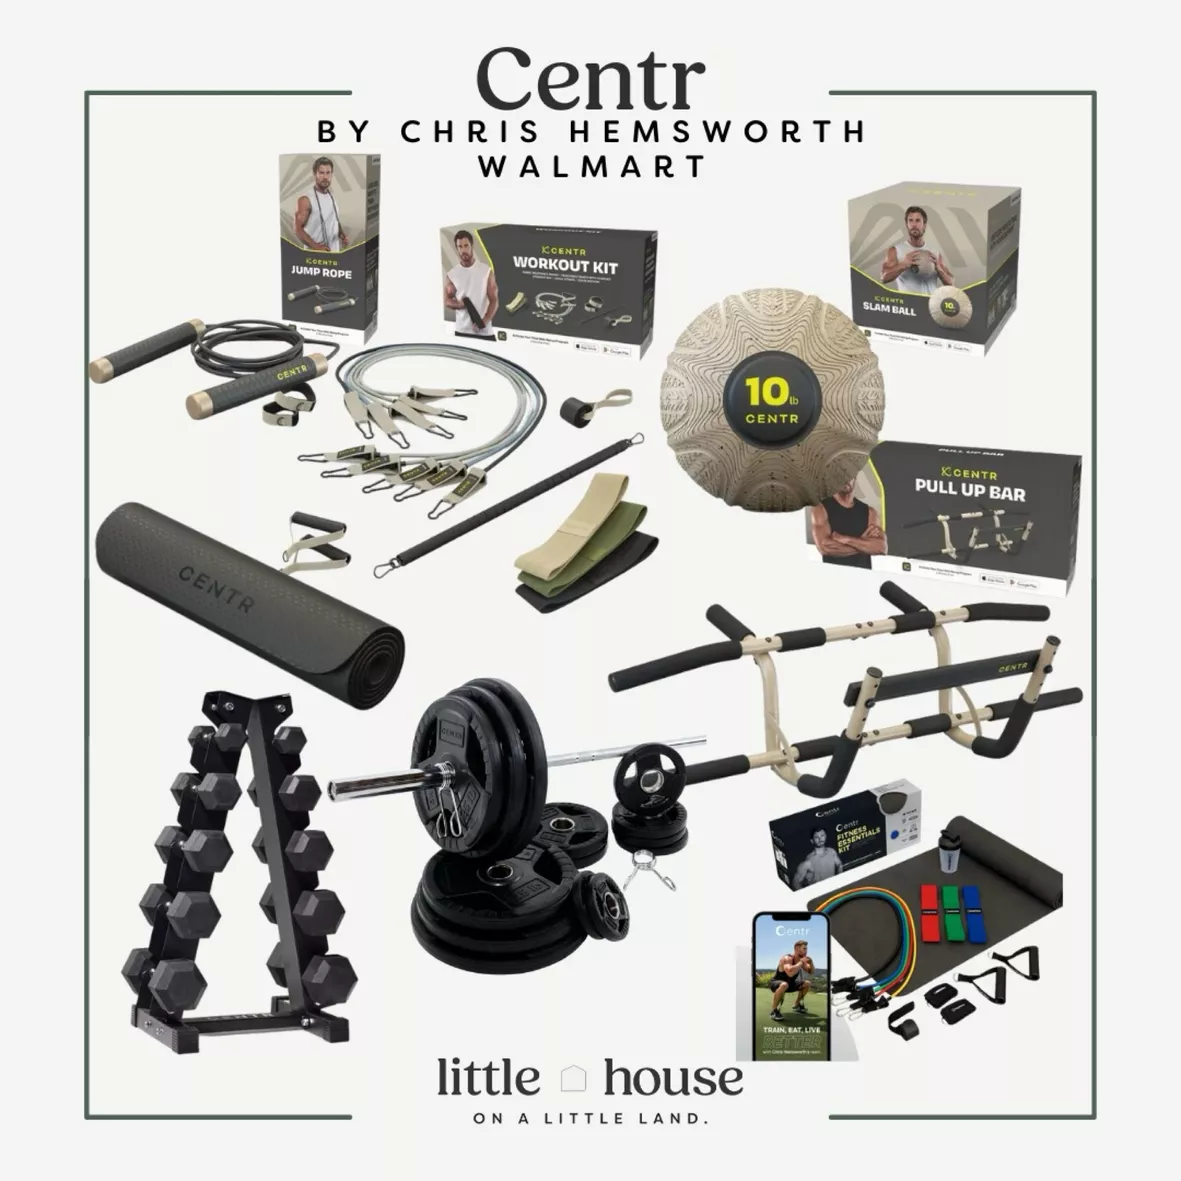 Centr fitness equipment: what's in the Workout Kit? 